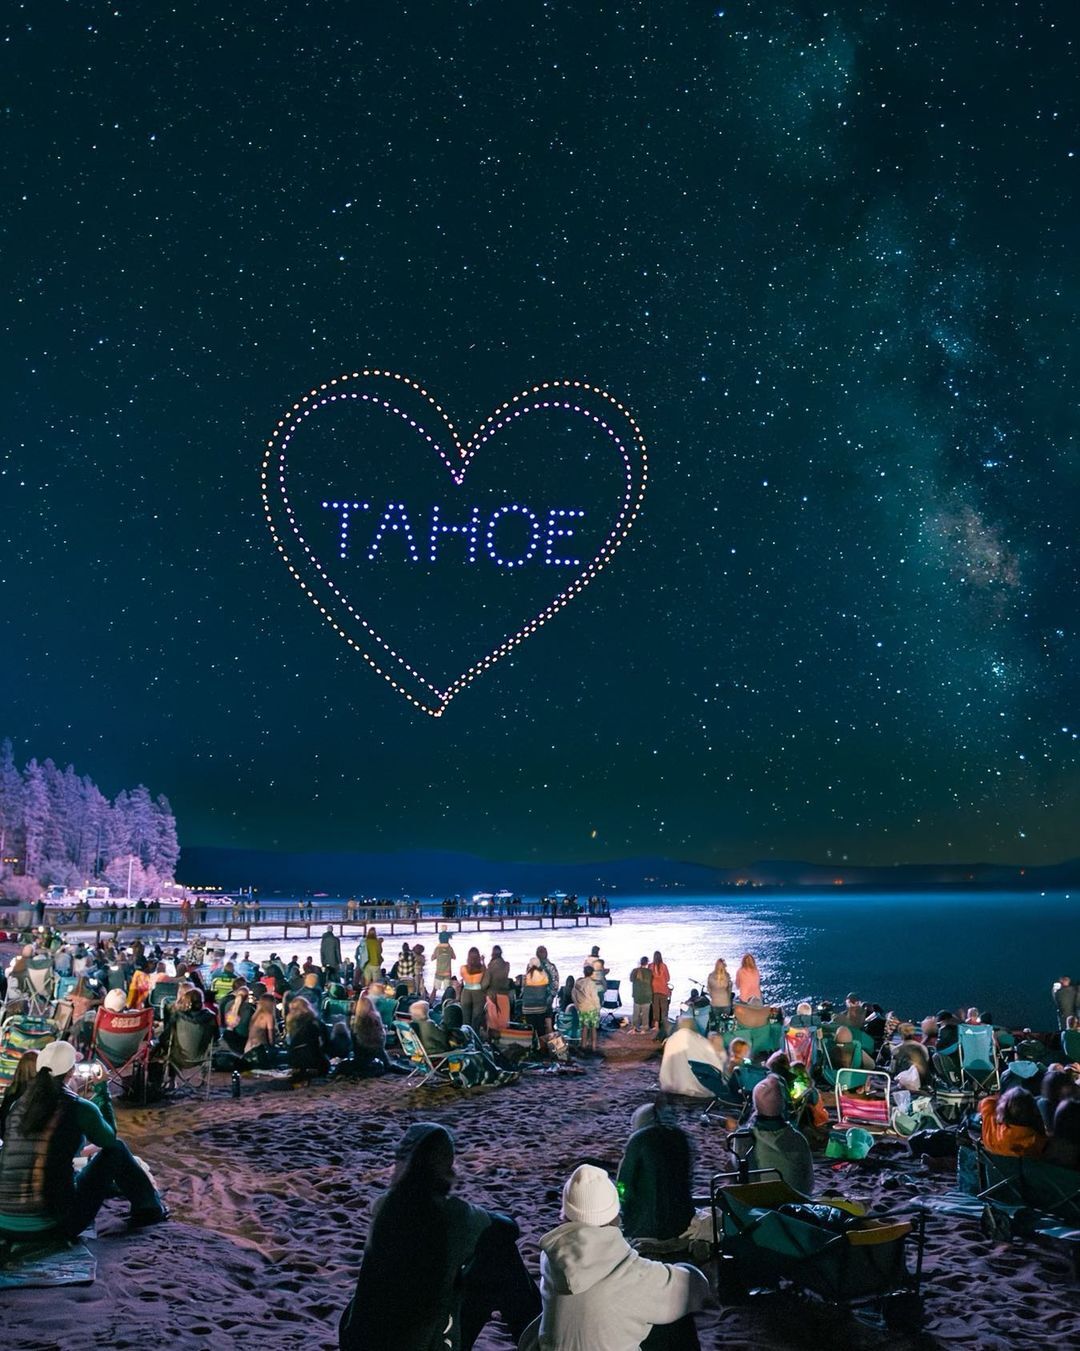 Drones form a heart around the word "Tahoe"  during a nighttime drone show at Kings Beach